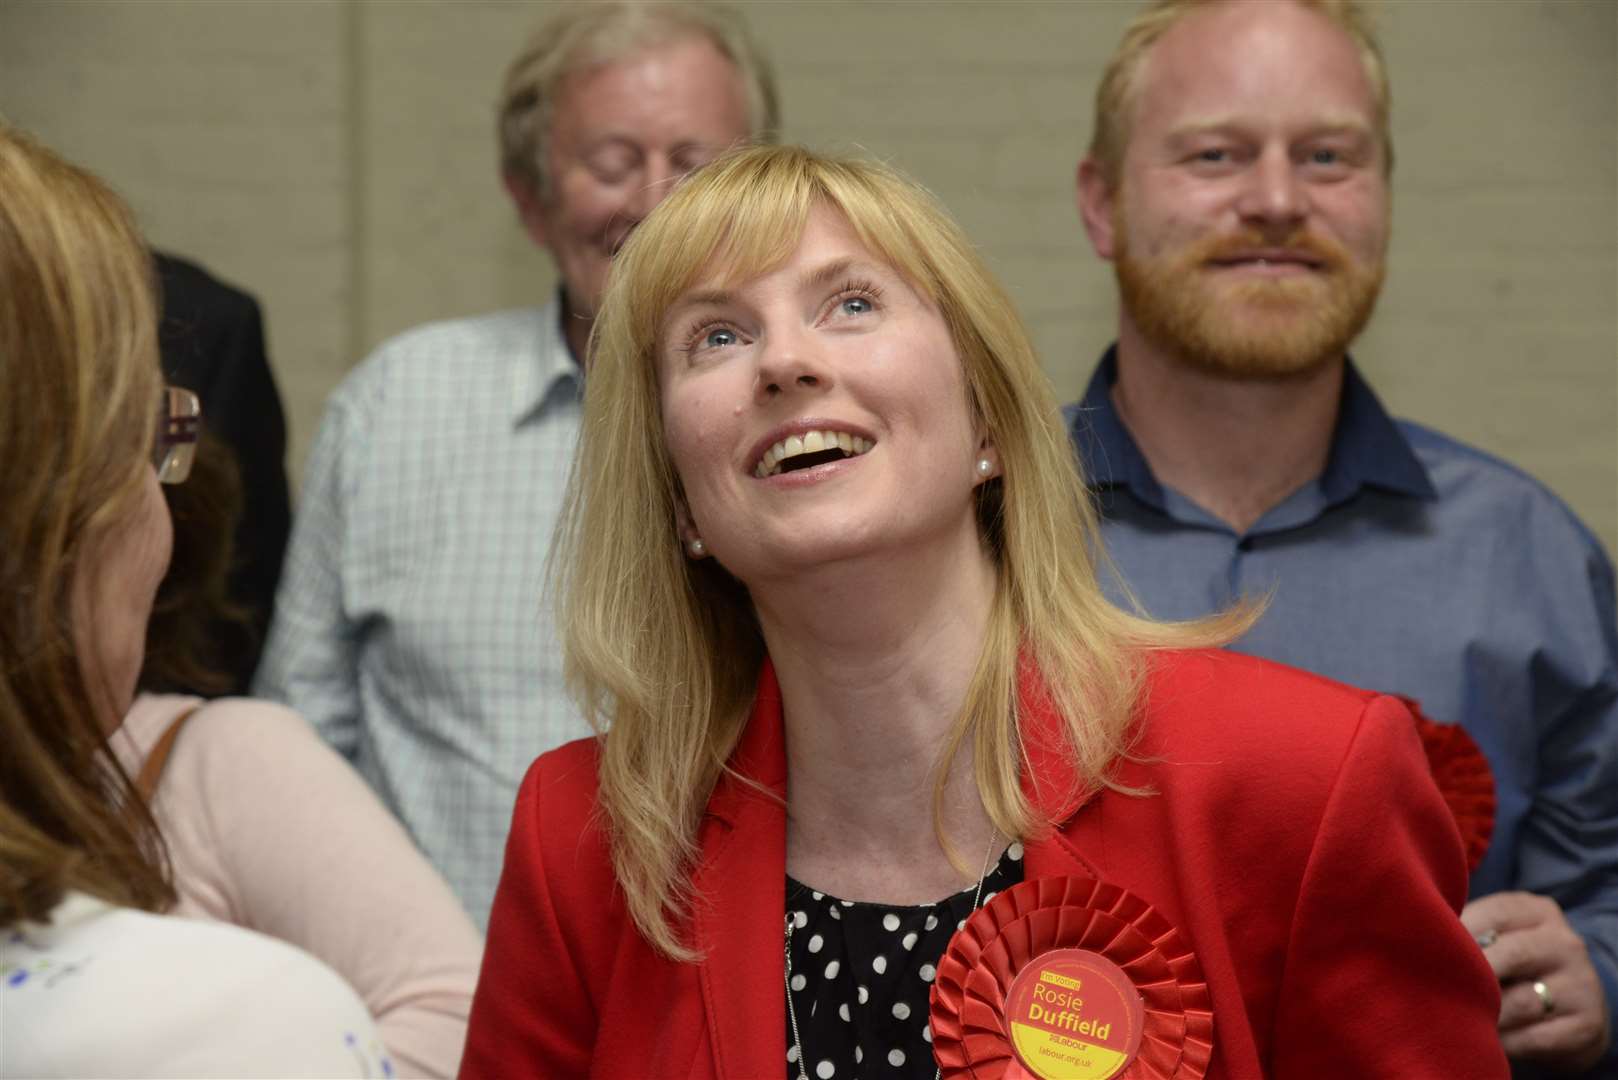 Things are looking up for Labour's Rosie Duffield, according to pollsters and bookies